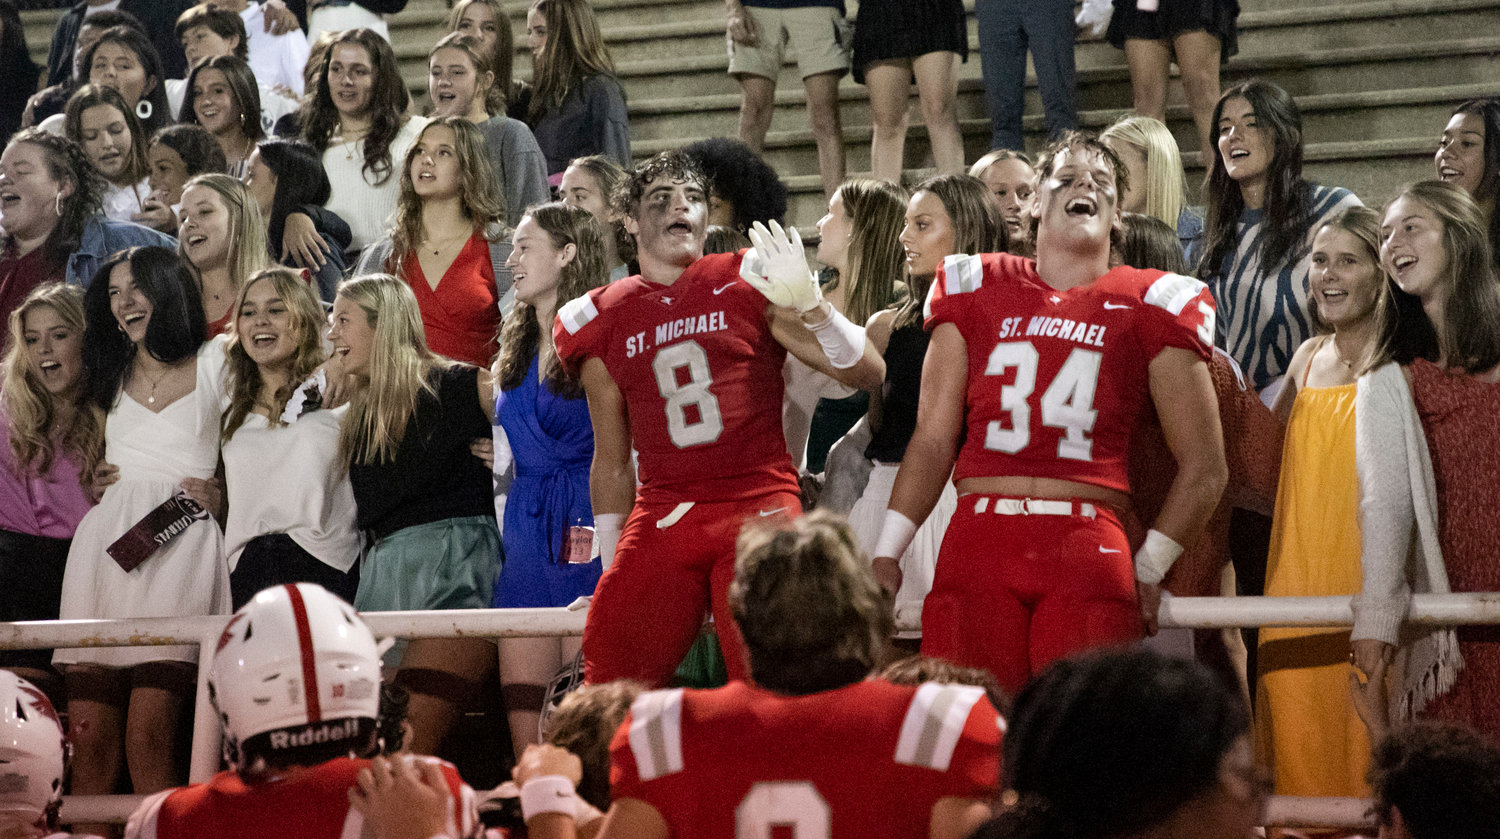 Cardinal seniors Ezra Sexton (8) and Tyler Cella (34) joined the student section to sing St. Michael Catholic’s alma mater after they beat Orange Beach, 49-41, Thursday night on W. C. Majors Field at Fairhope Municipal Stadium.